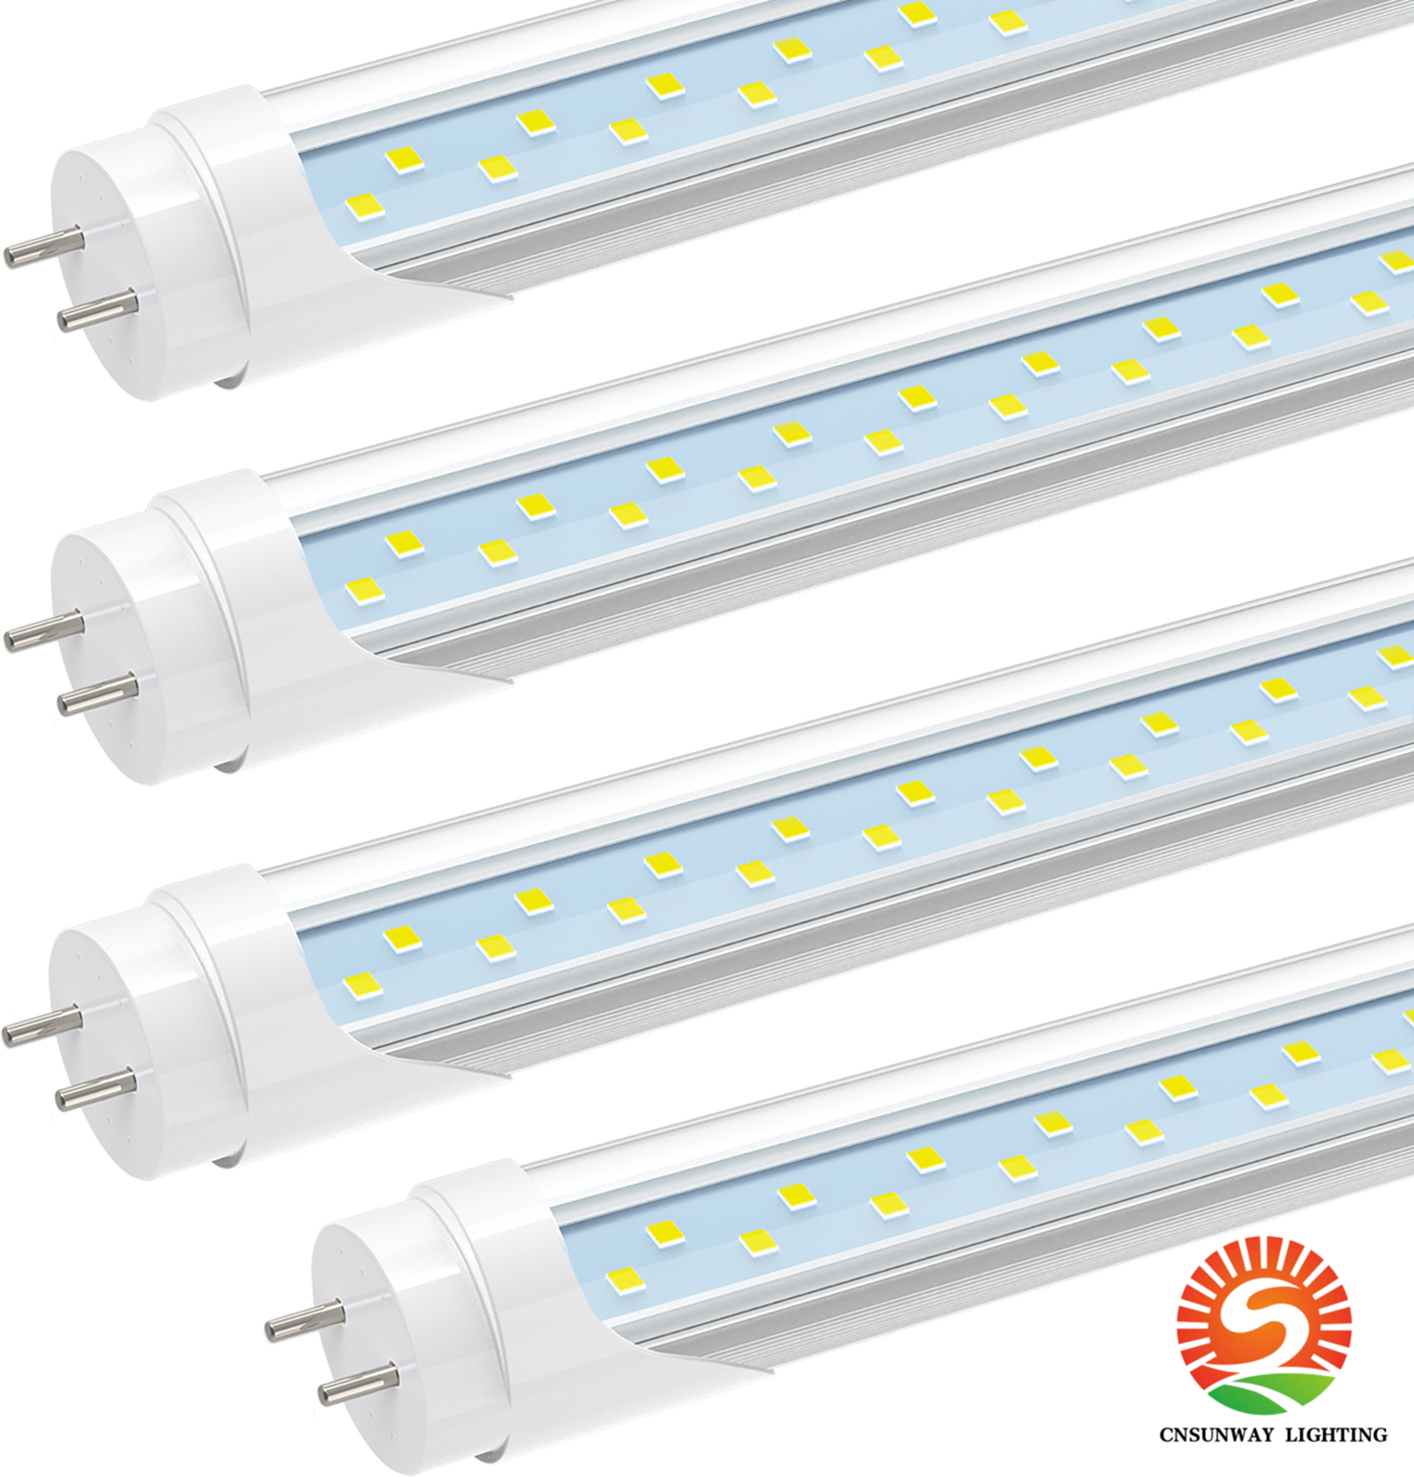 3FT LED Tube Light Bulbs, G13 bi-PinT8 Flourescent 18W 6000K cool white, 36 Inch T10 T12 Replacements, Remove Ballast, Dual-end Powered, Clear, 3 Foot shop lights